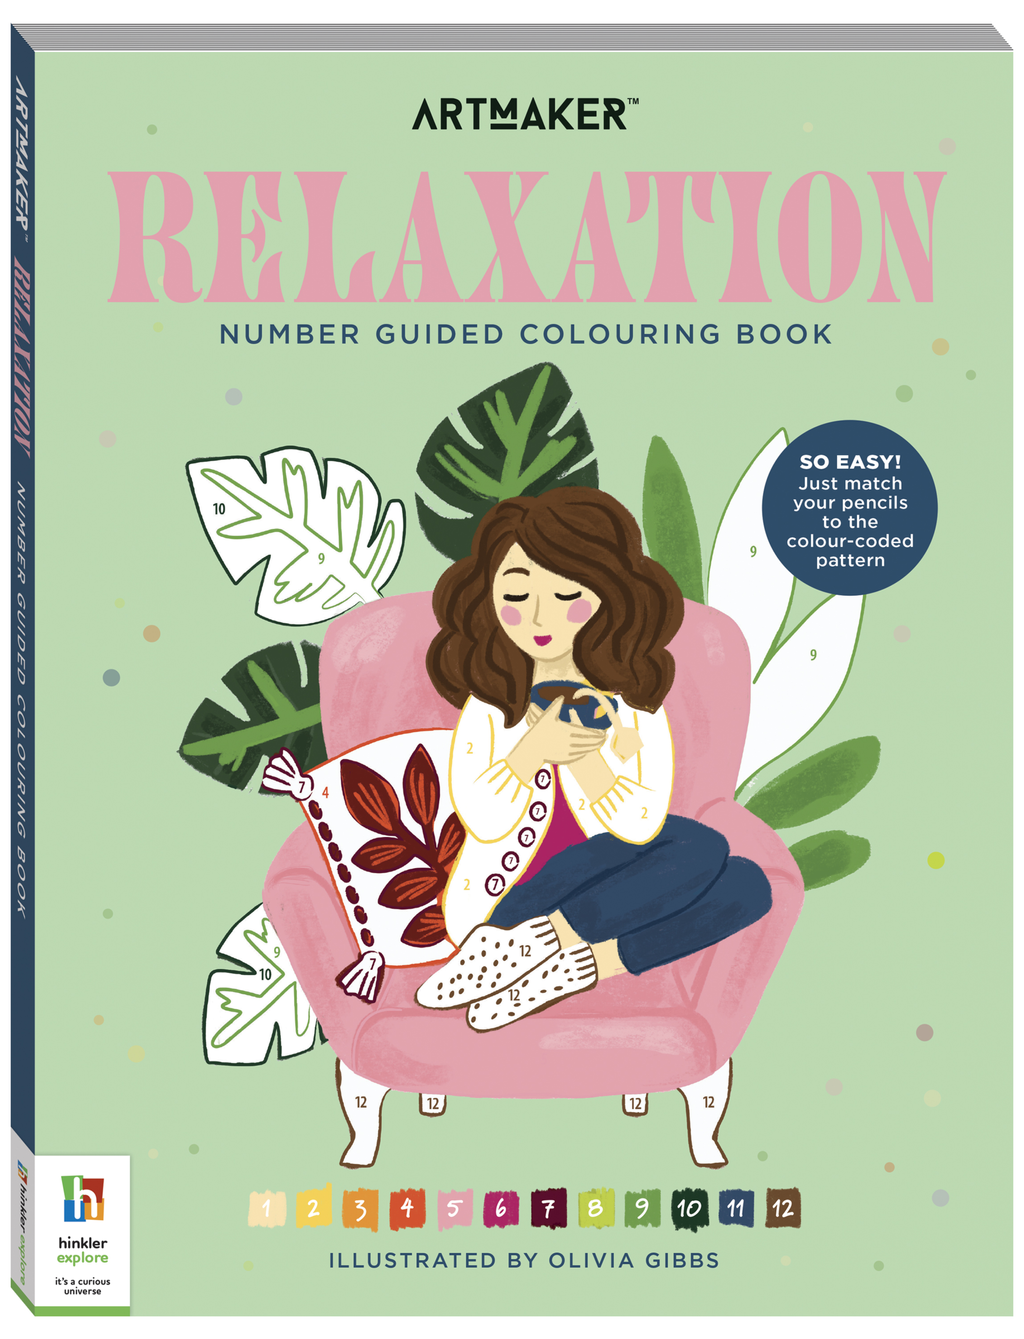 ARTMAKER RELAXATION NUMBER GUIDED COLOURING BOOK 1